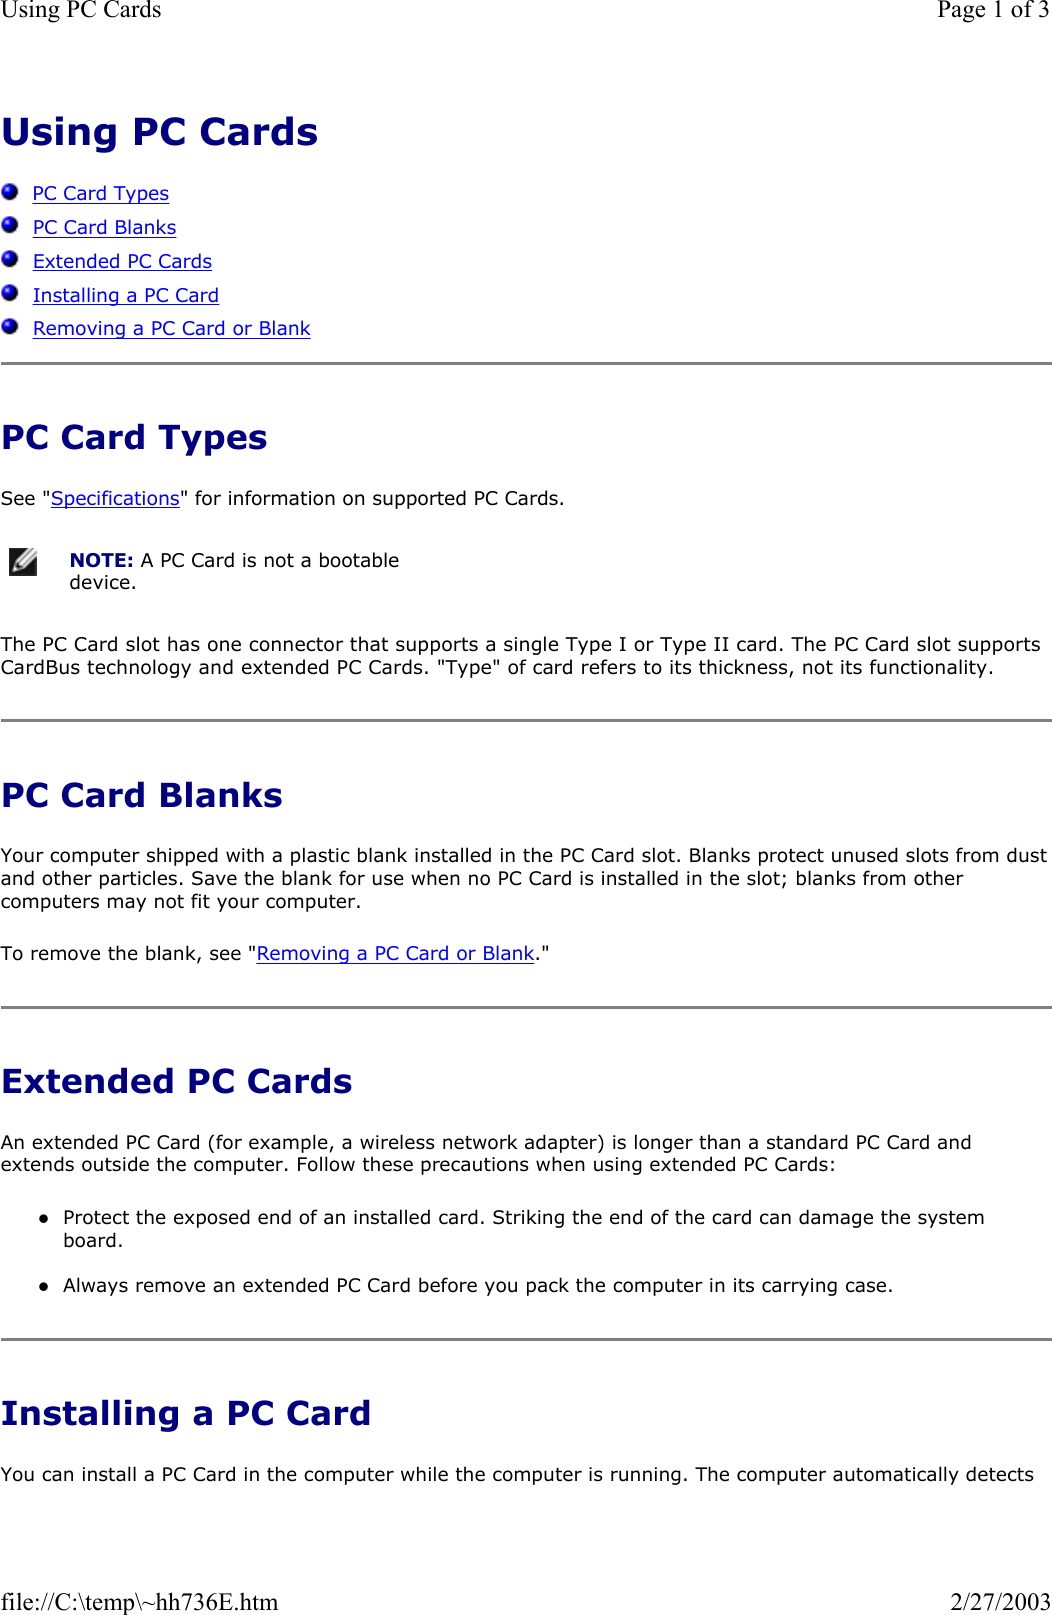 Using PC Cards      PC Card Types   PC Card Blanks   Extended PC Cards   Installing a PC Card   Removing a PC Card or Blank PC Card Types See &quot;Specifications&quot; for information on supported PC Cards. The PC Card slot has one connector that supports a single Type I or Type II card. The PC Card slot supports CardBus technology and extended PC Cards. &quot;Type&quot; of card refers to its thickness, not its functionality. PC Card Blanks Your computer shipped with a plastic blank installed in the PC Card slot. Blanks protect unused slots from dust and other particles. Save the blank for use when no PC Card is installed in the slot; blanks from other computers may not fit your computer. To remove the blank, see &quot;Removing a PC Card or Blank.&quot; Extended PC Cards An extended PC Card (for example, a wireless network adapter) is longer than a standard PC Card and extends outside the computer. Follow these precautions when using extended PC Cards: zProtect the exposed end of an installed card. Striking the end of the card can damage the system board.  zAlways remove an extended PC Card before you pack the computer in its carrying case.  Installing a PC Card You can install a PC Card in the computer while the computer is running. The computer automatically detects NOTE: A PC Card is not a bootable device.Page 1 of 3Using PC Cards2/27/2003file://C:\temp\~hh736E.htm